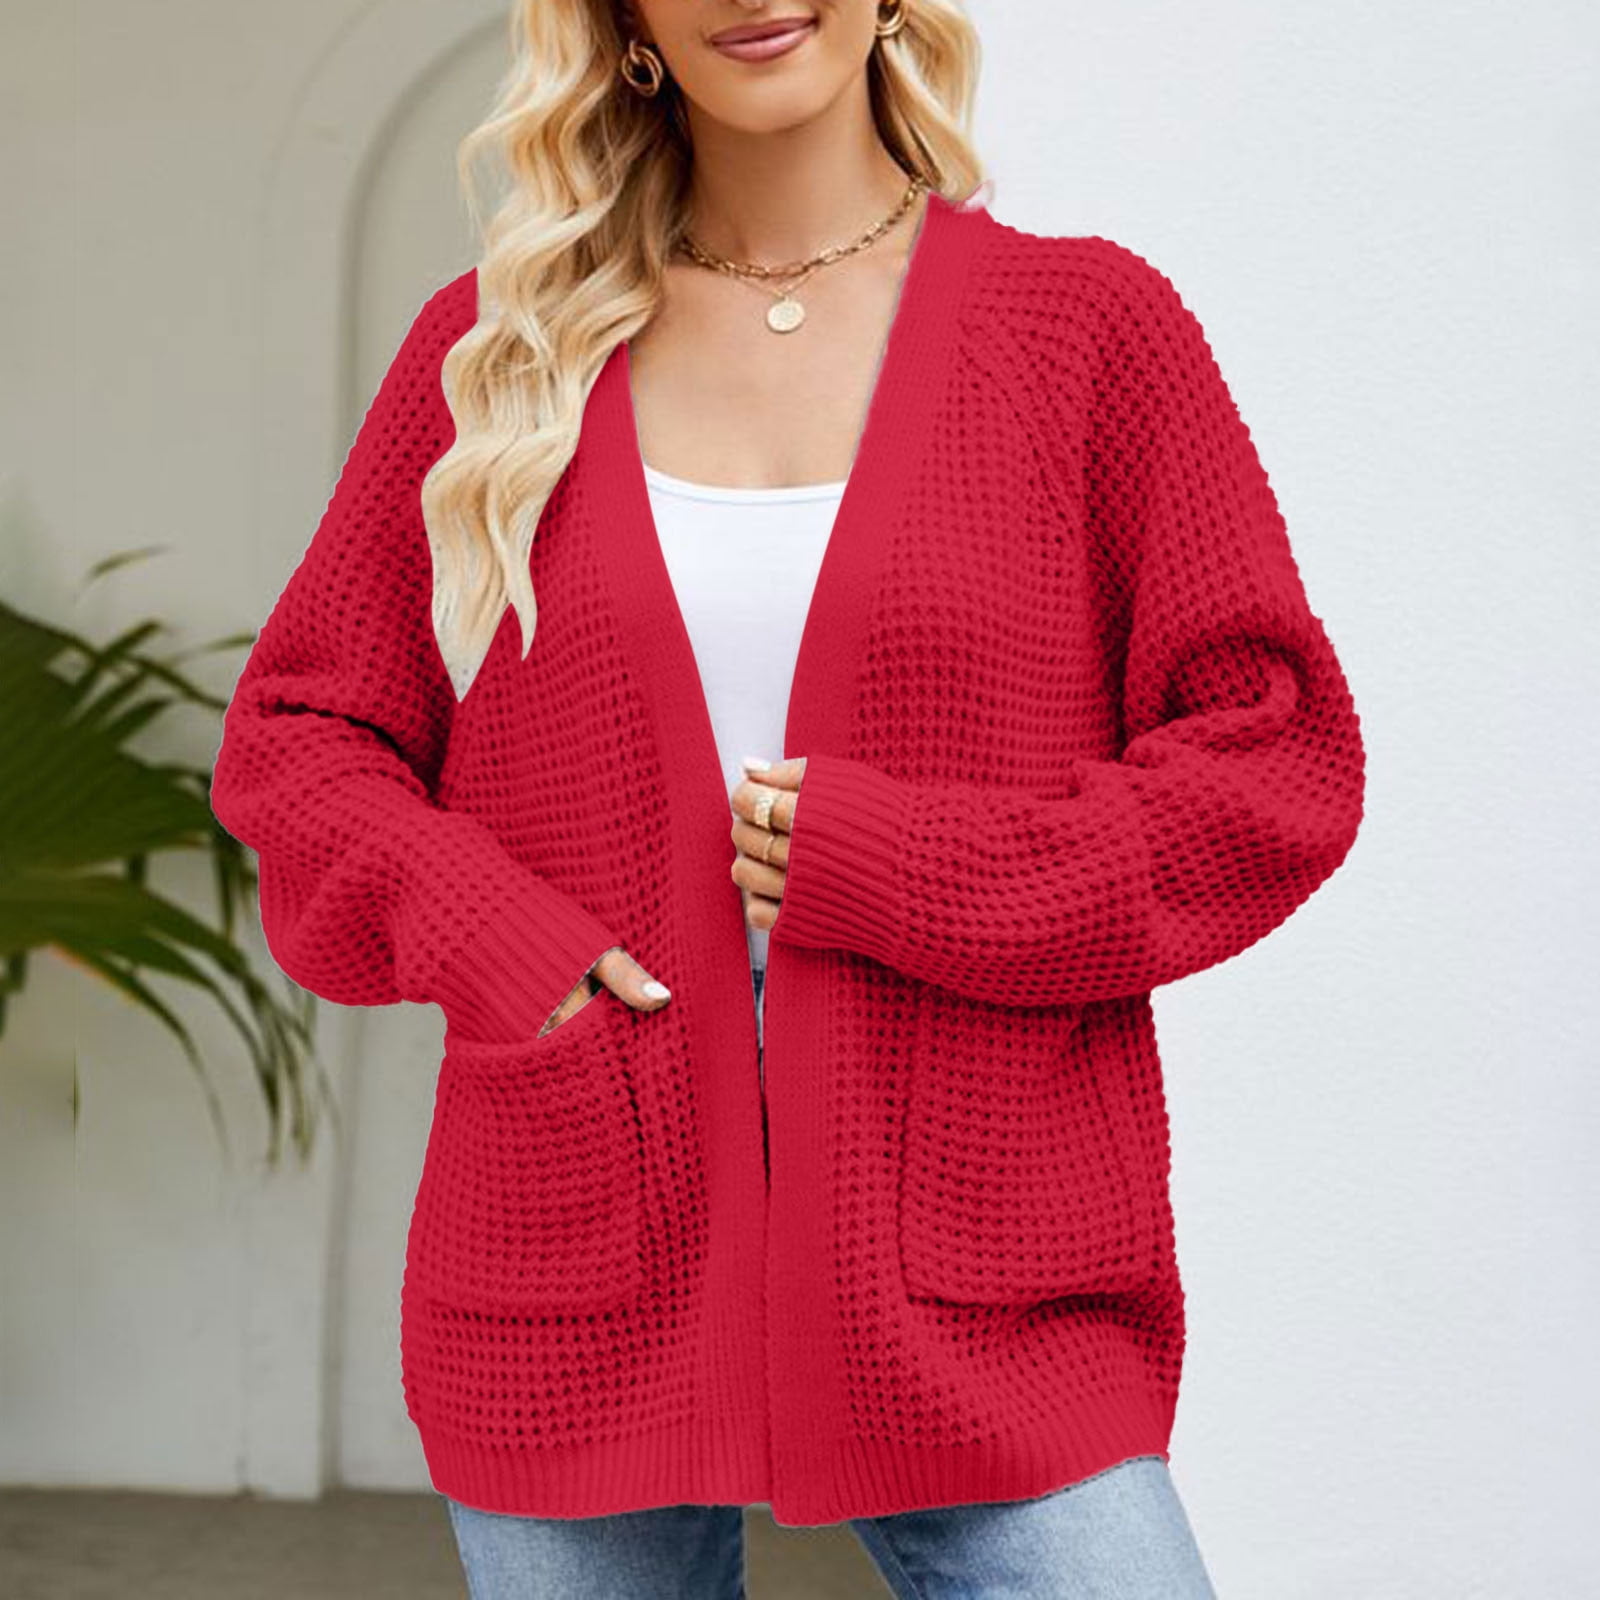 Virmaxy Cable Knit Cardigan Women's New Mid Length Slouchy Knitted Sweater  Cardigan Knit Cardigans For Women Red L 